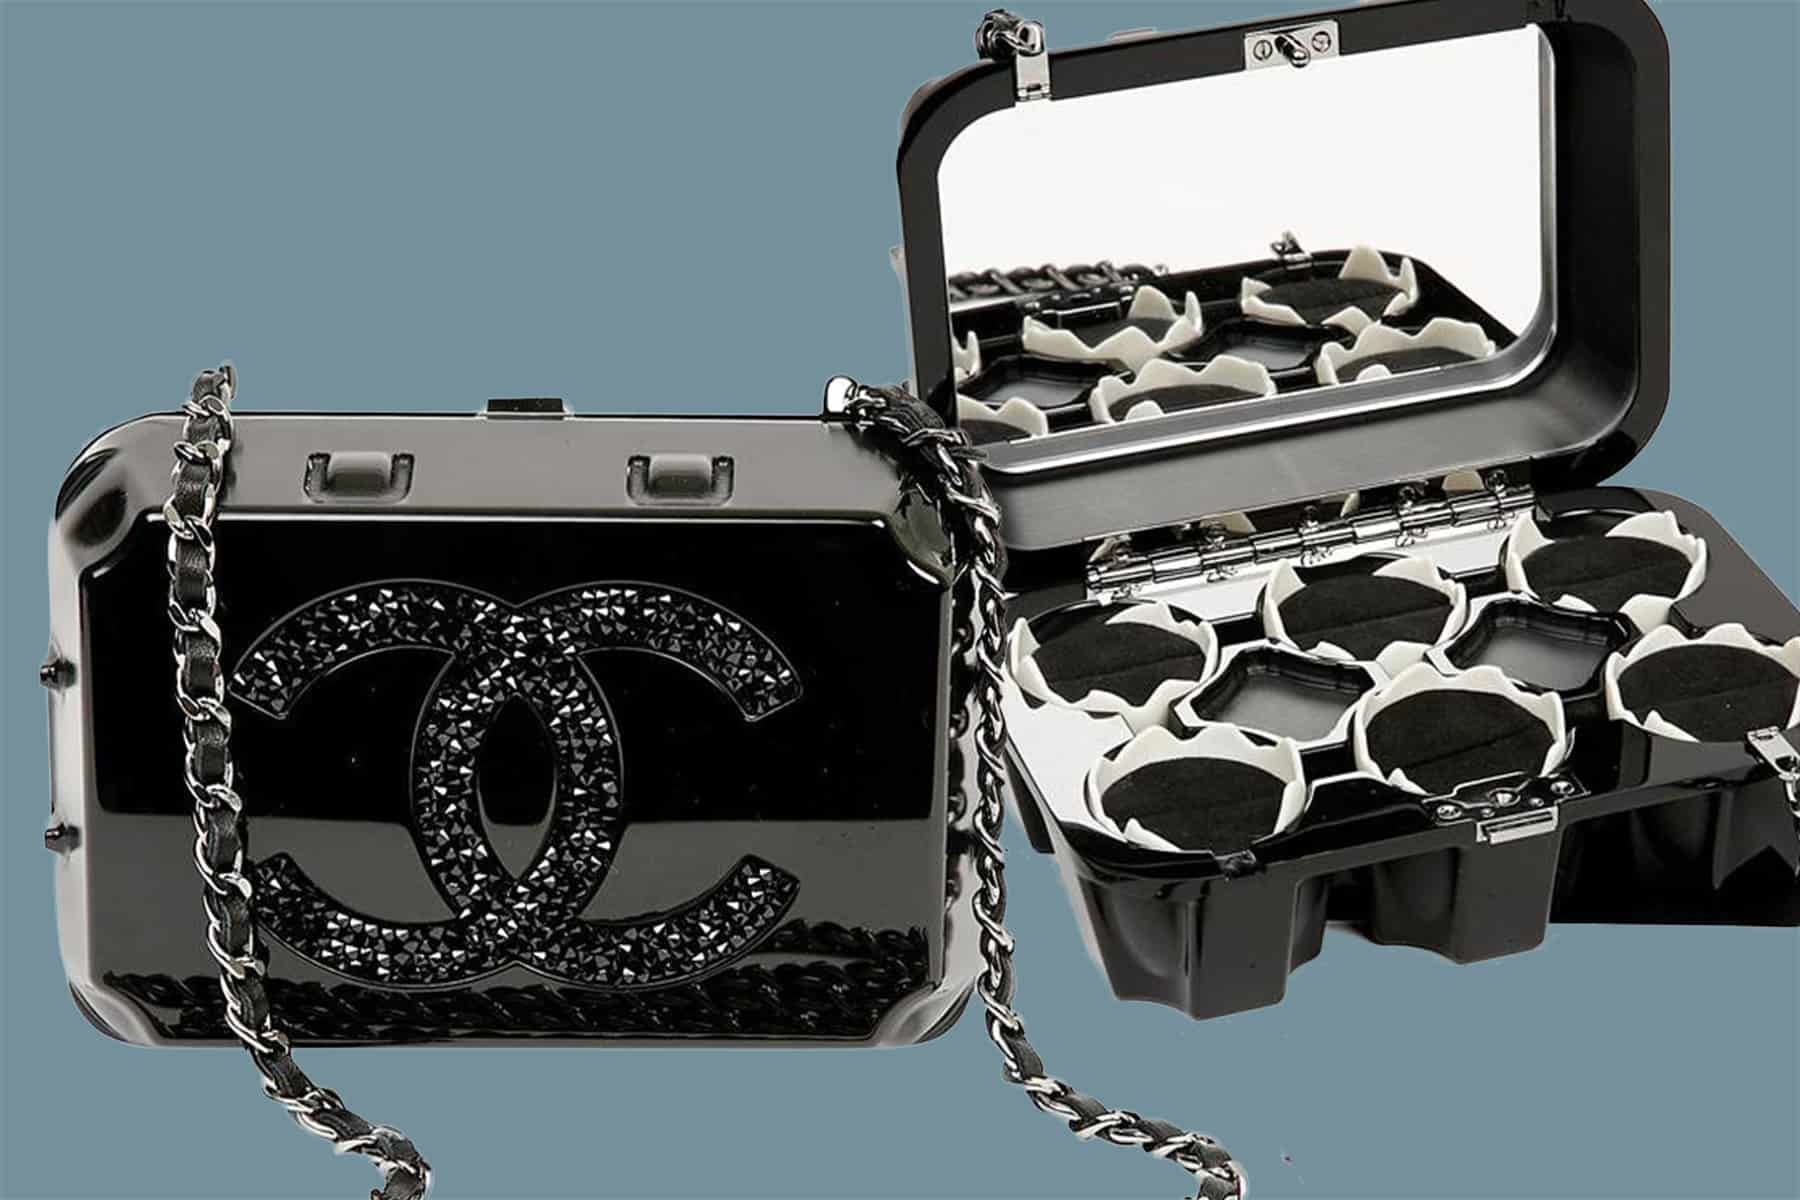 With a Wink, Karl Lagerfeld Sent This Egg-Carton-Shaped Chanel Bag